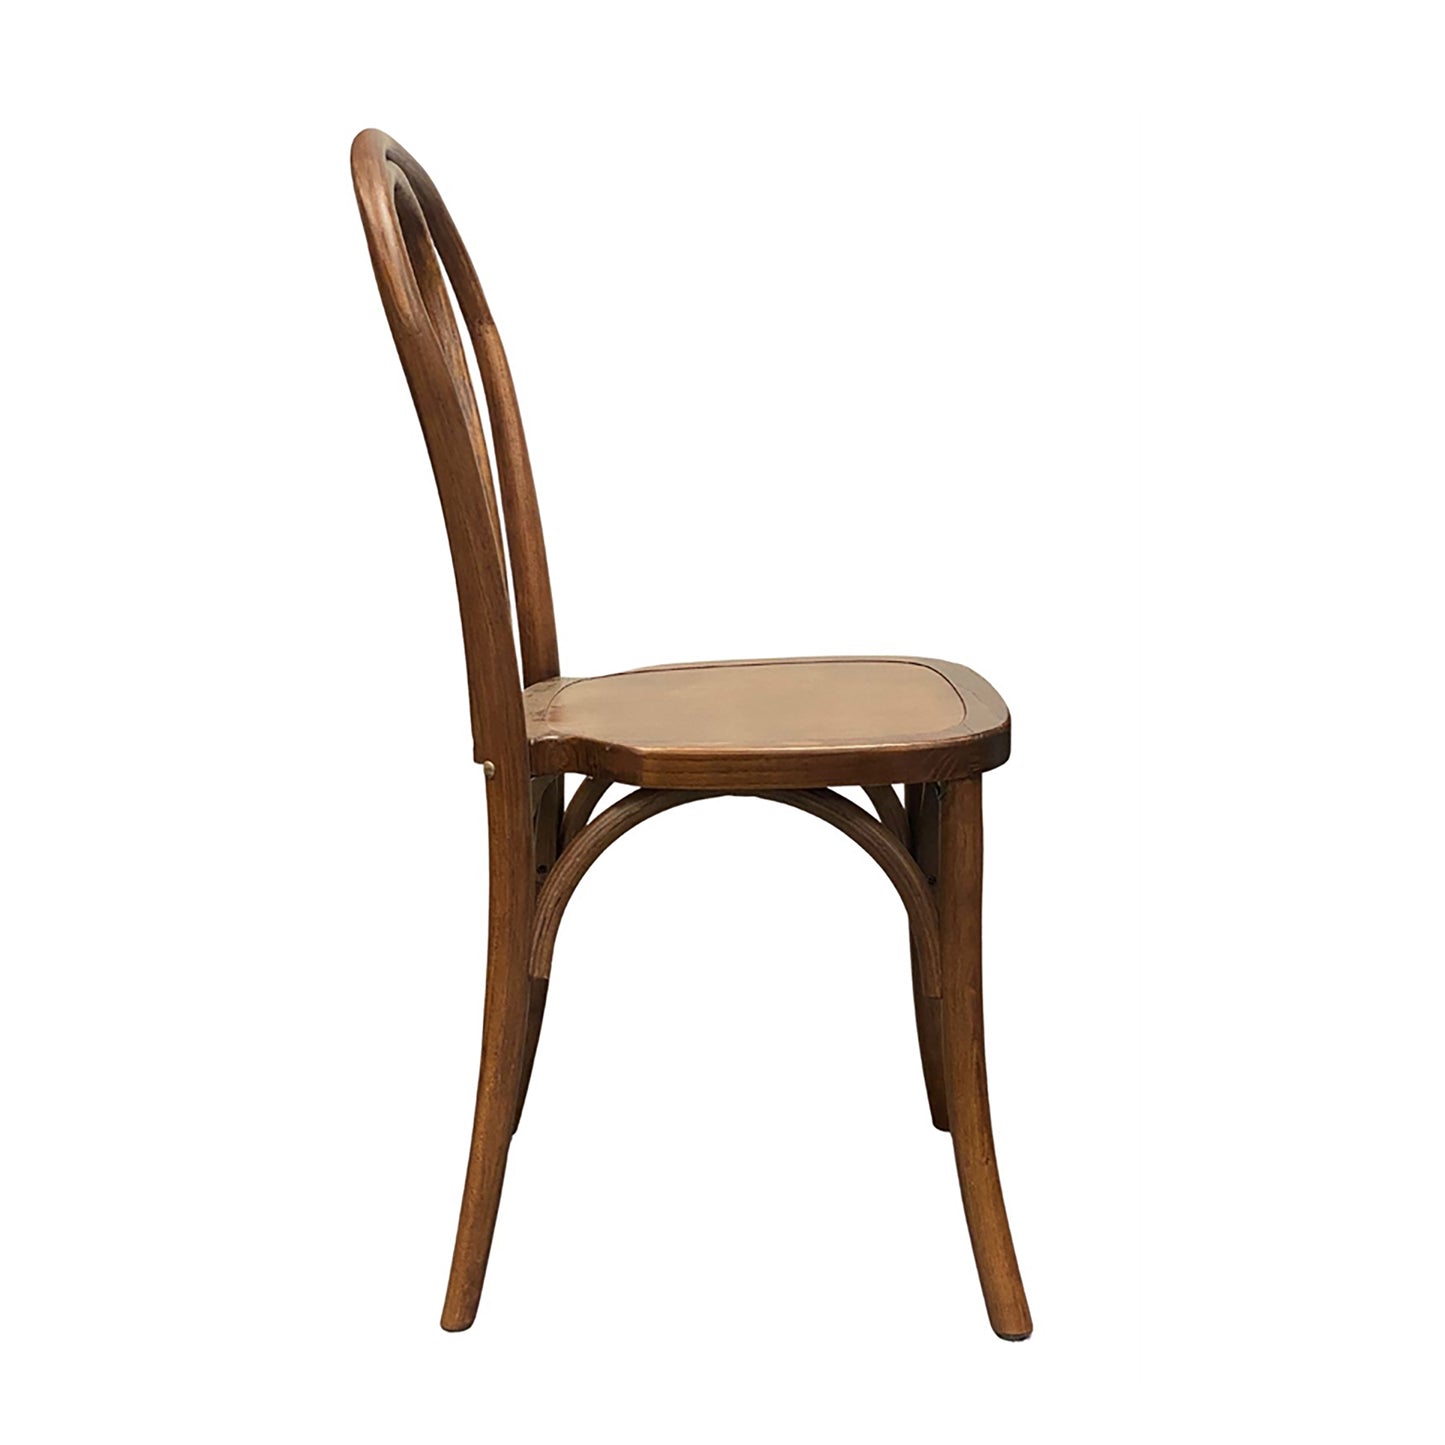 4. Loopback Stacking Chair